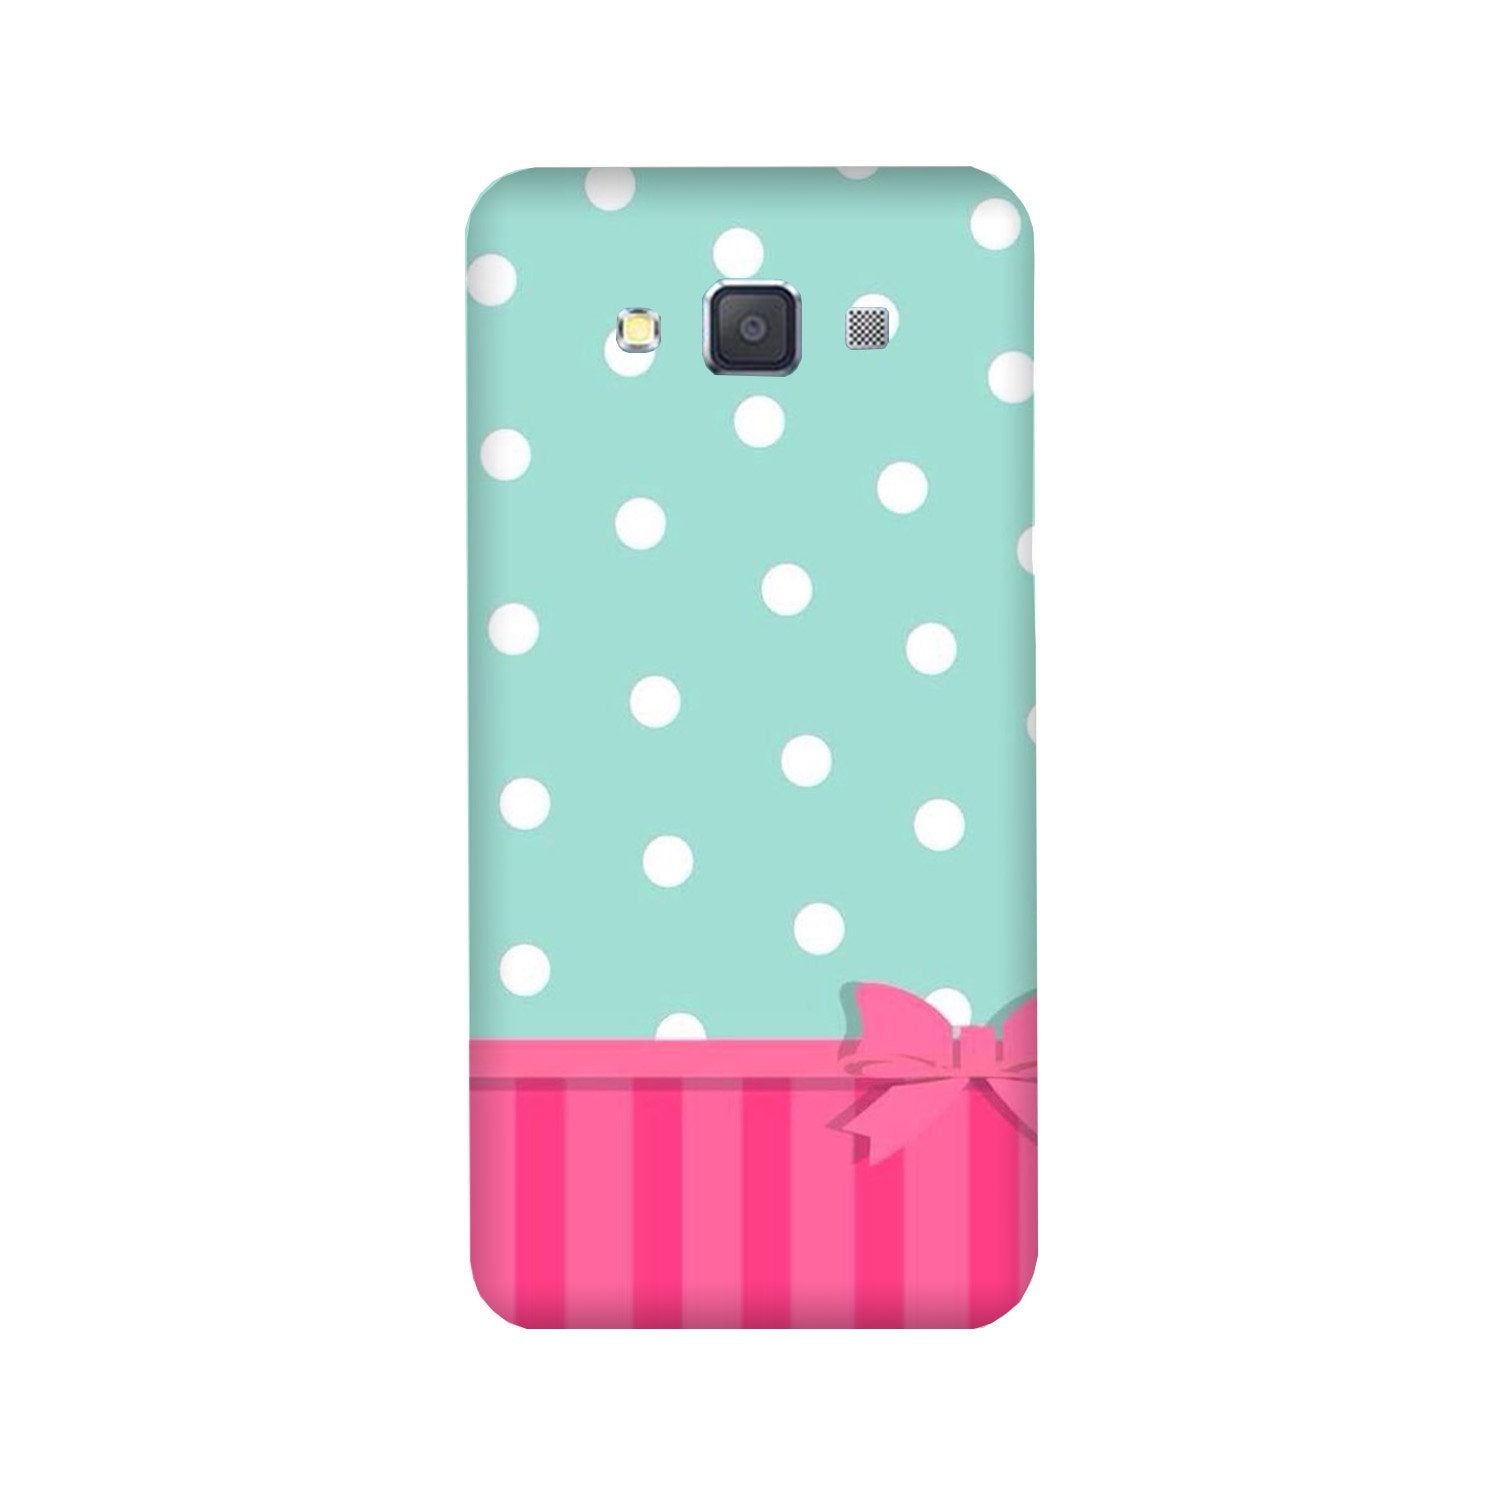 Gift Wrap Case for Galaxy J5 (2016)